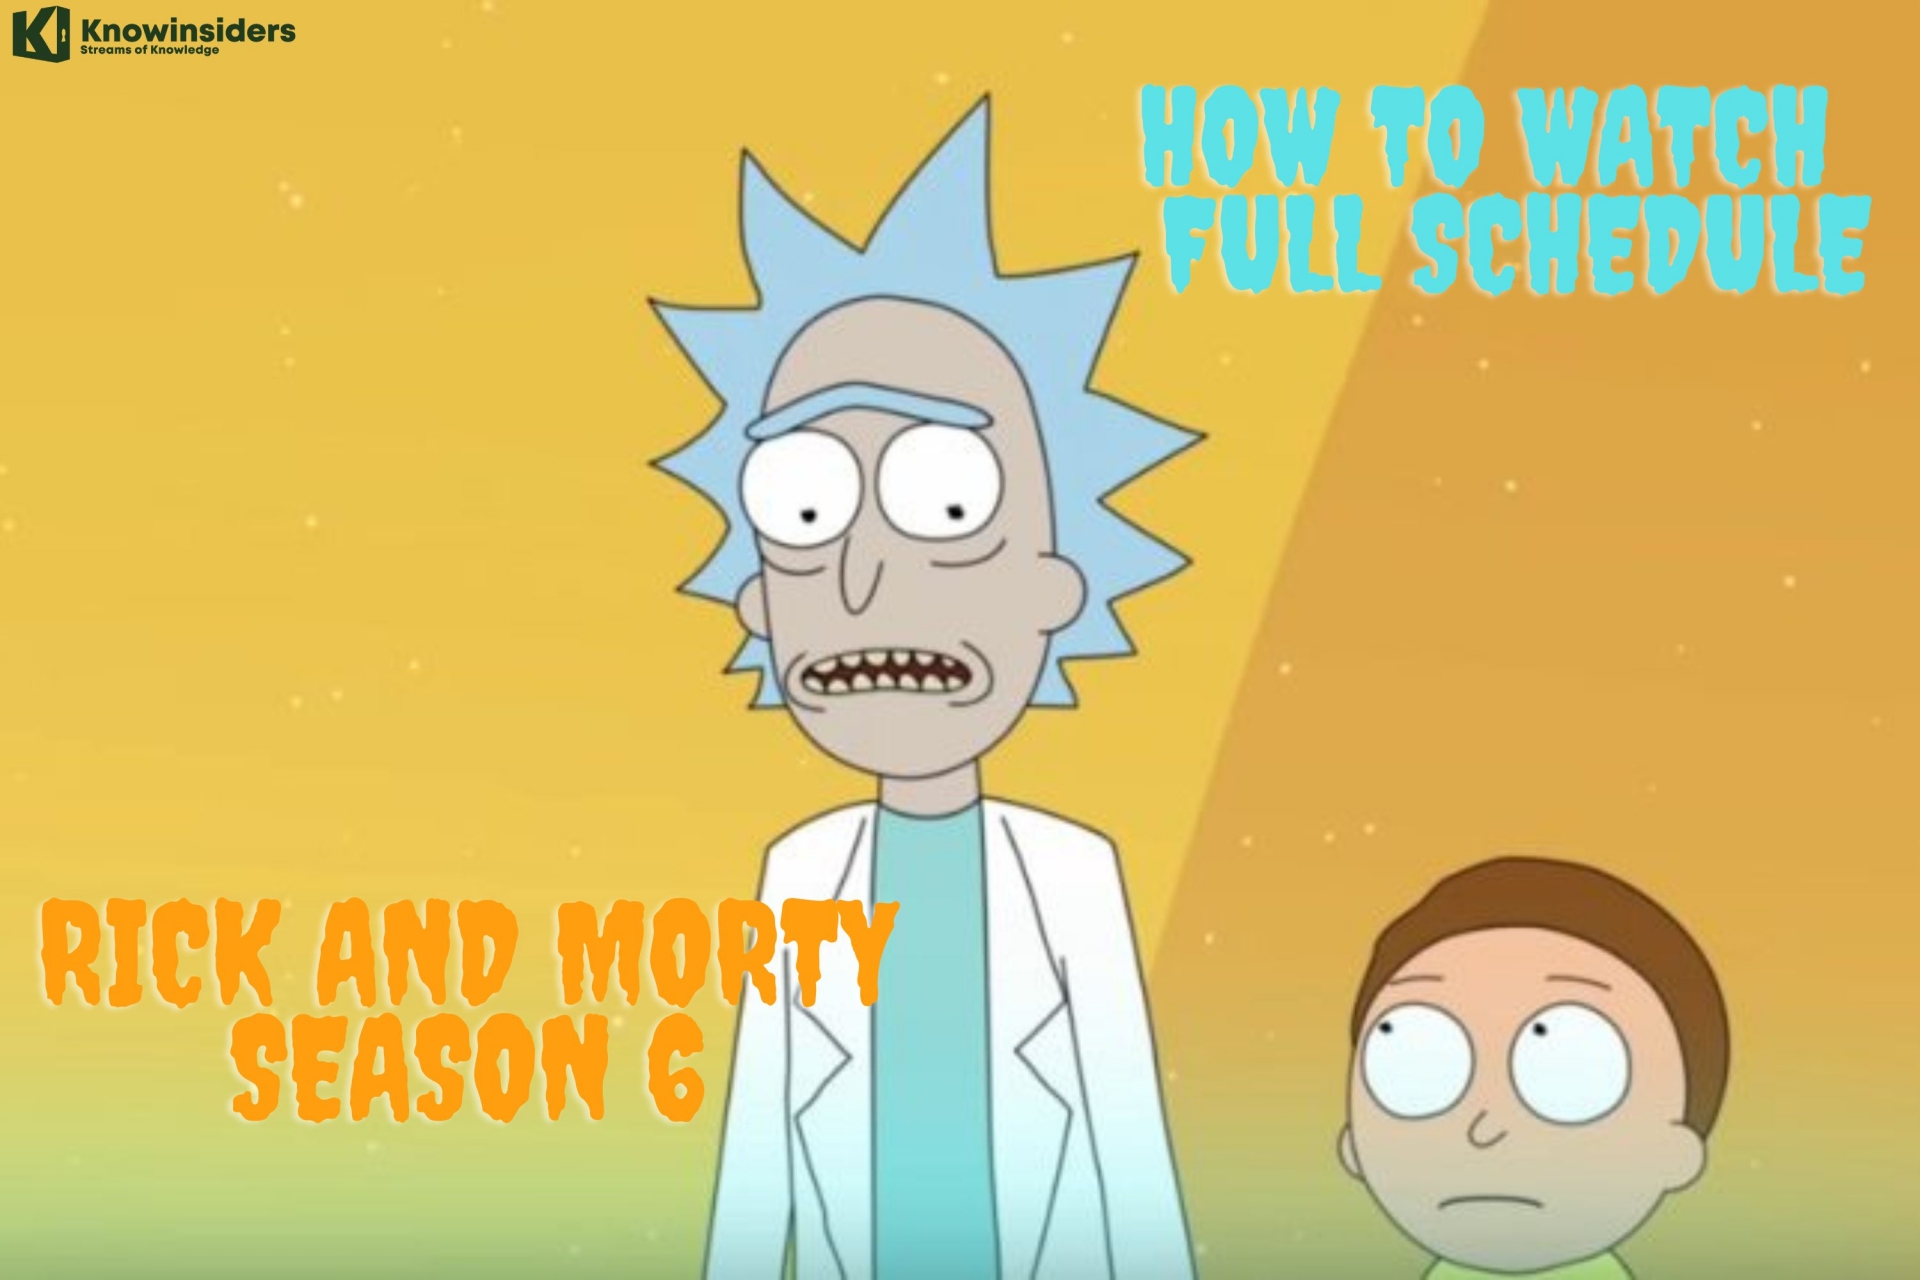 Rick and Morty Season 6: How to Watch and Full Schedule